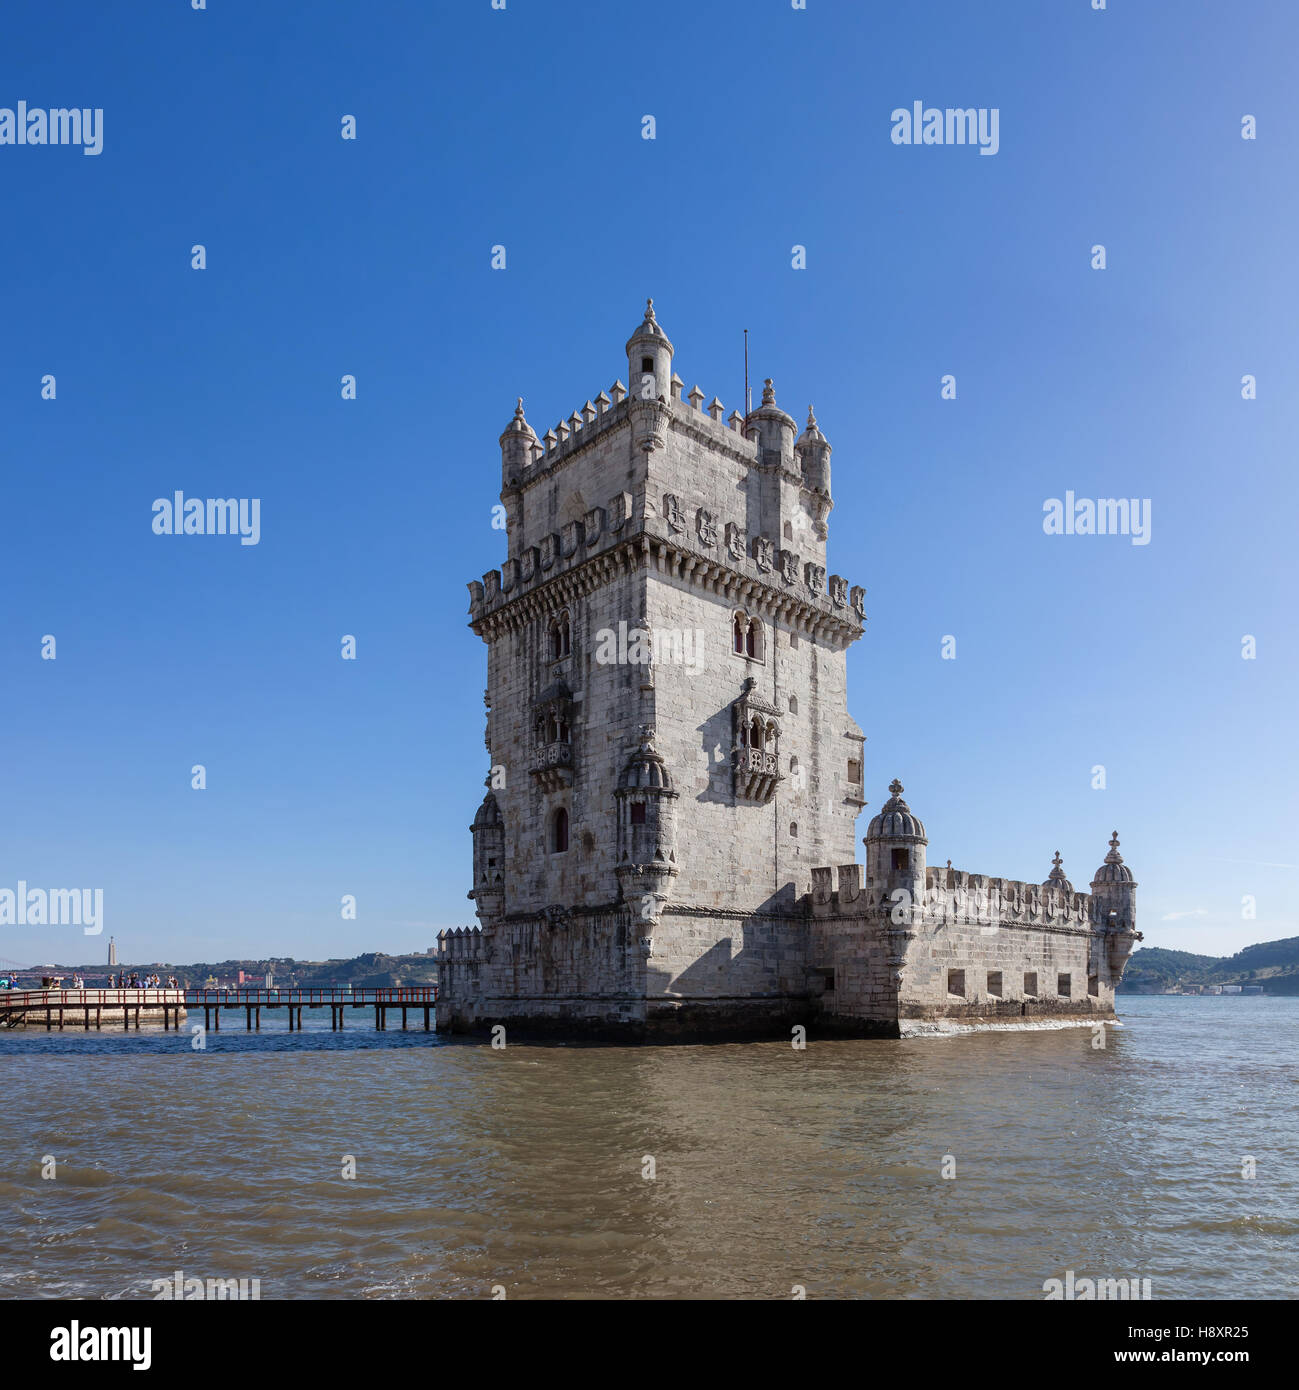 Belem Tower in Lisbon, Portugal. Classified as UNESCO World Heritage it stands as the best example of the Manuelino art. Stock Photo